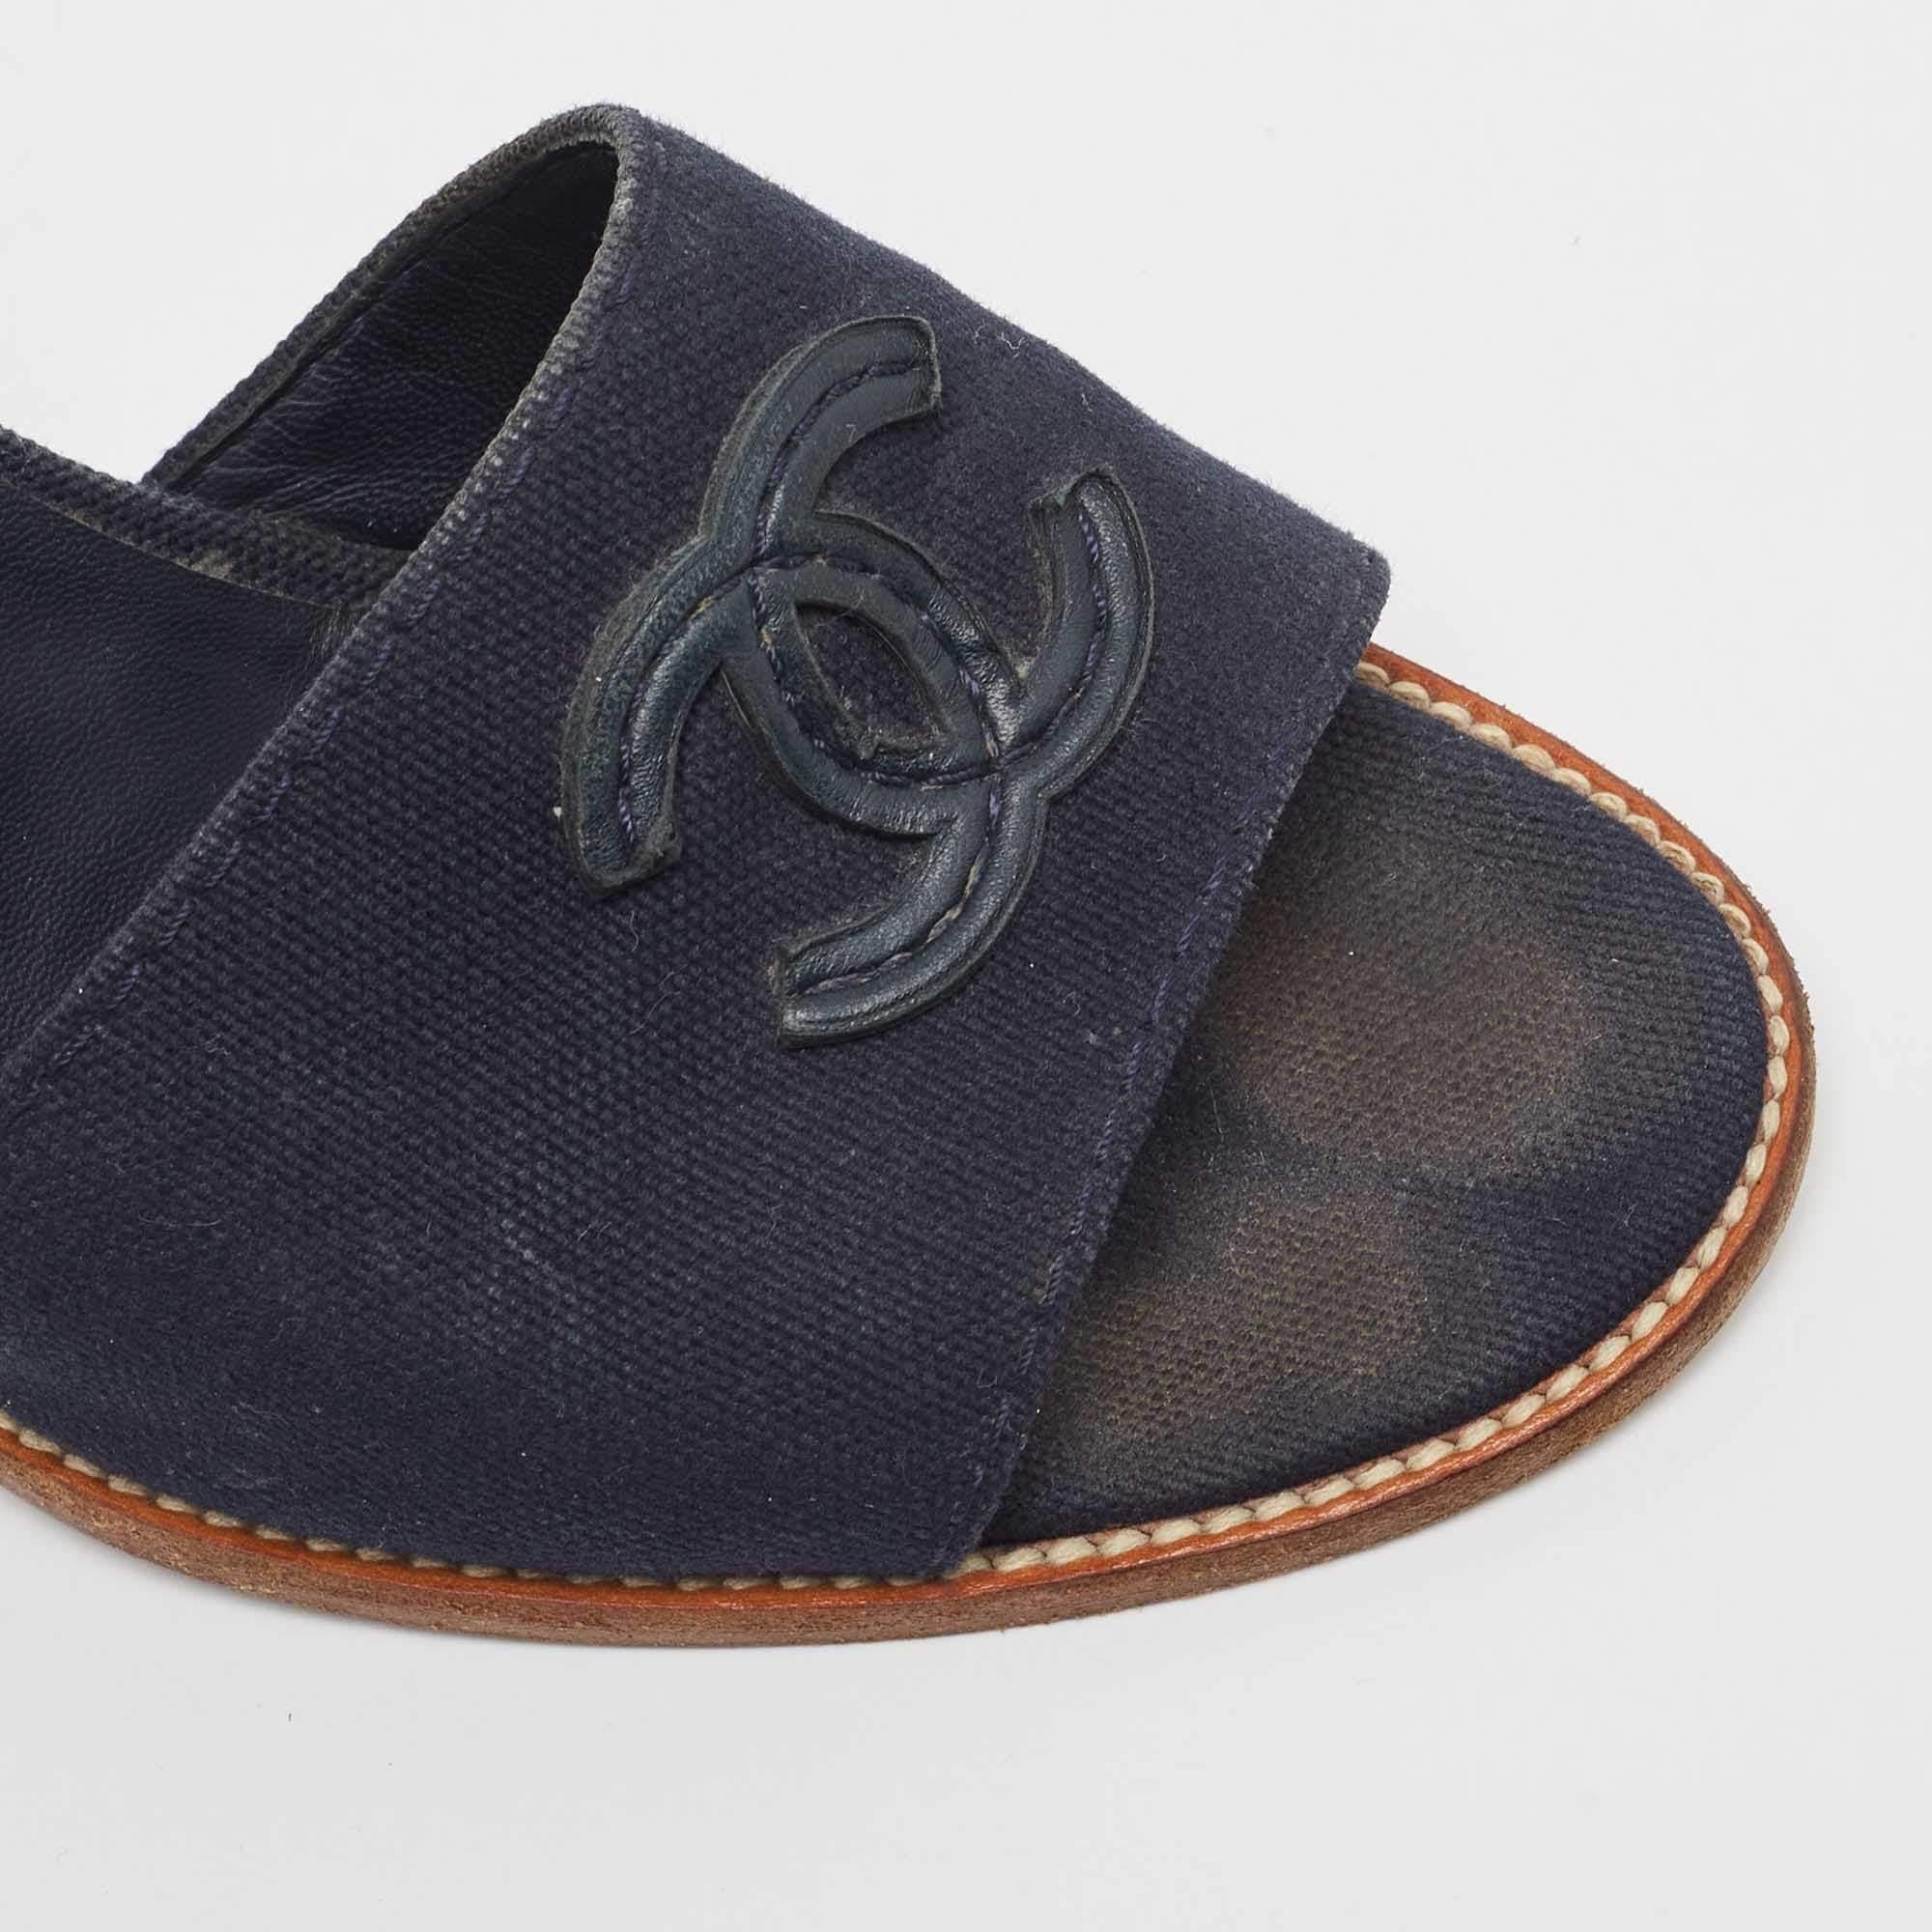 Chanel Navy Blue Canvas CC Wedge Slide Size 37.5 For Sale 2